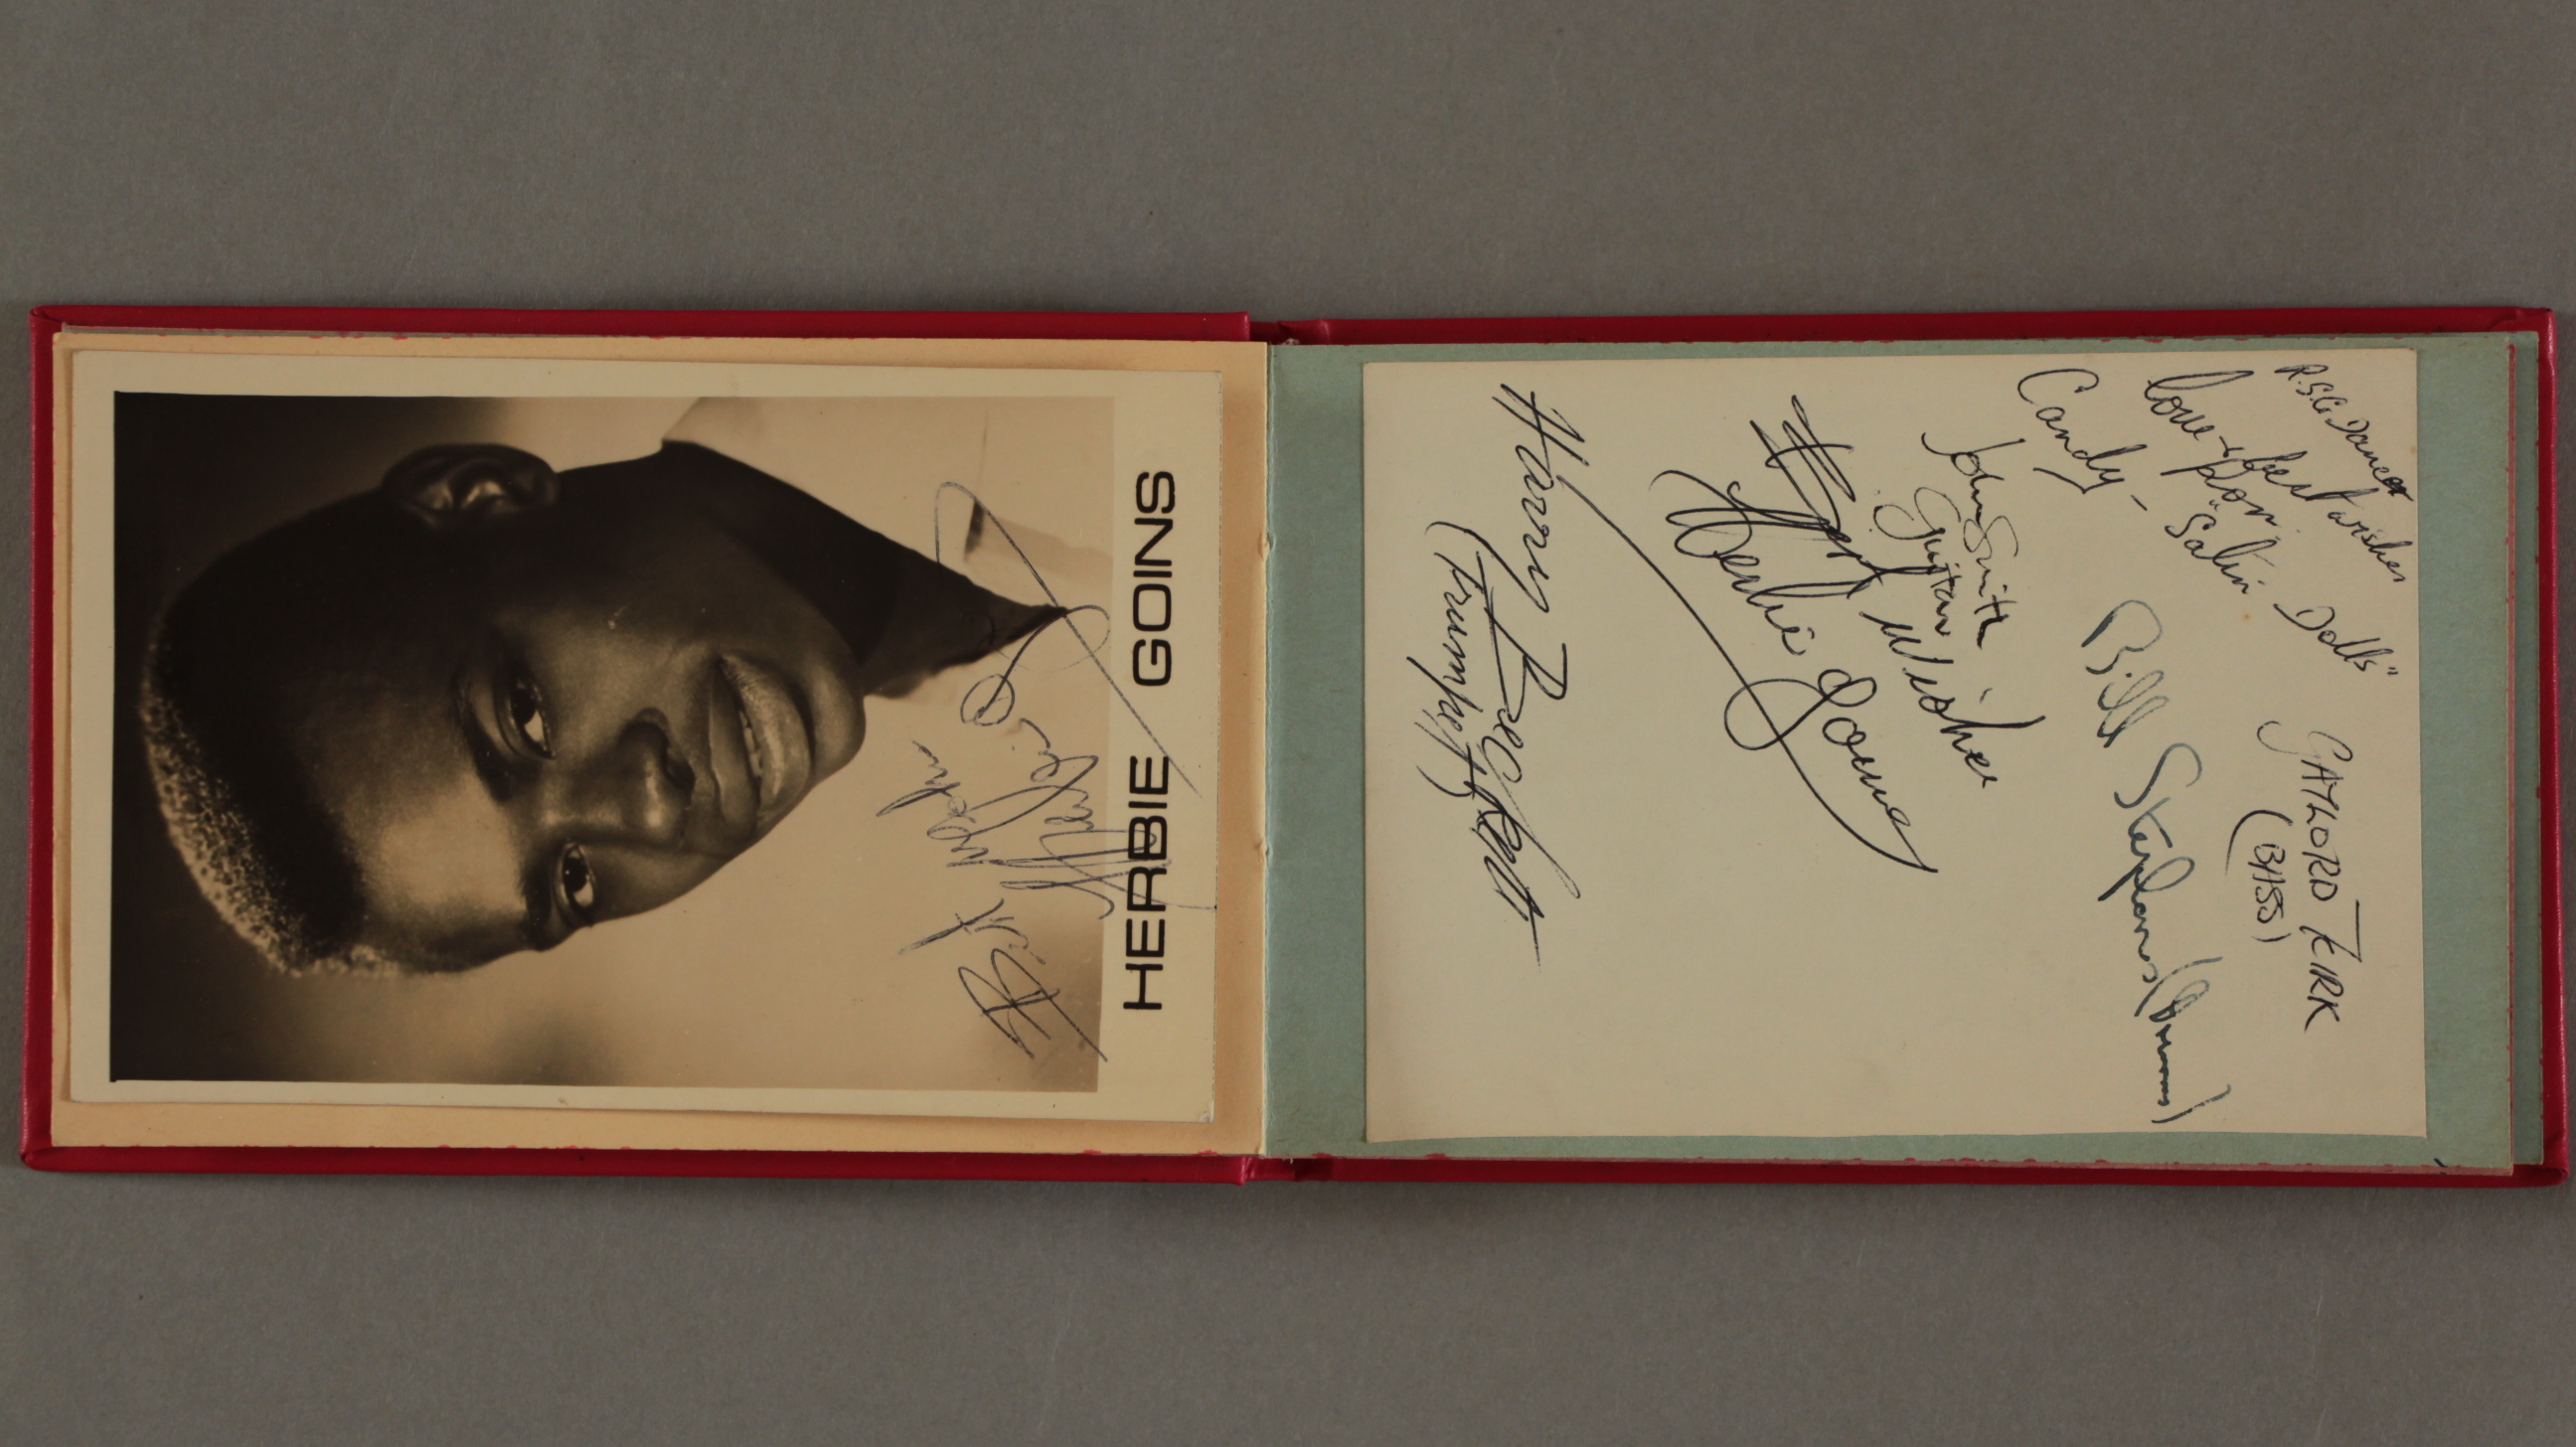 Autograph book of pop groups that performed at Stourbridge Town Hall from 16th November 1966 to 5th - Image 4 of 10